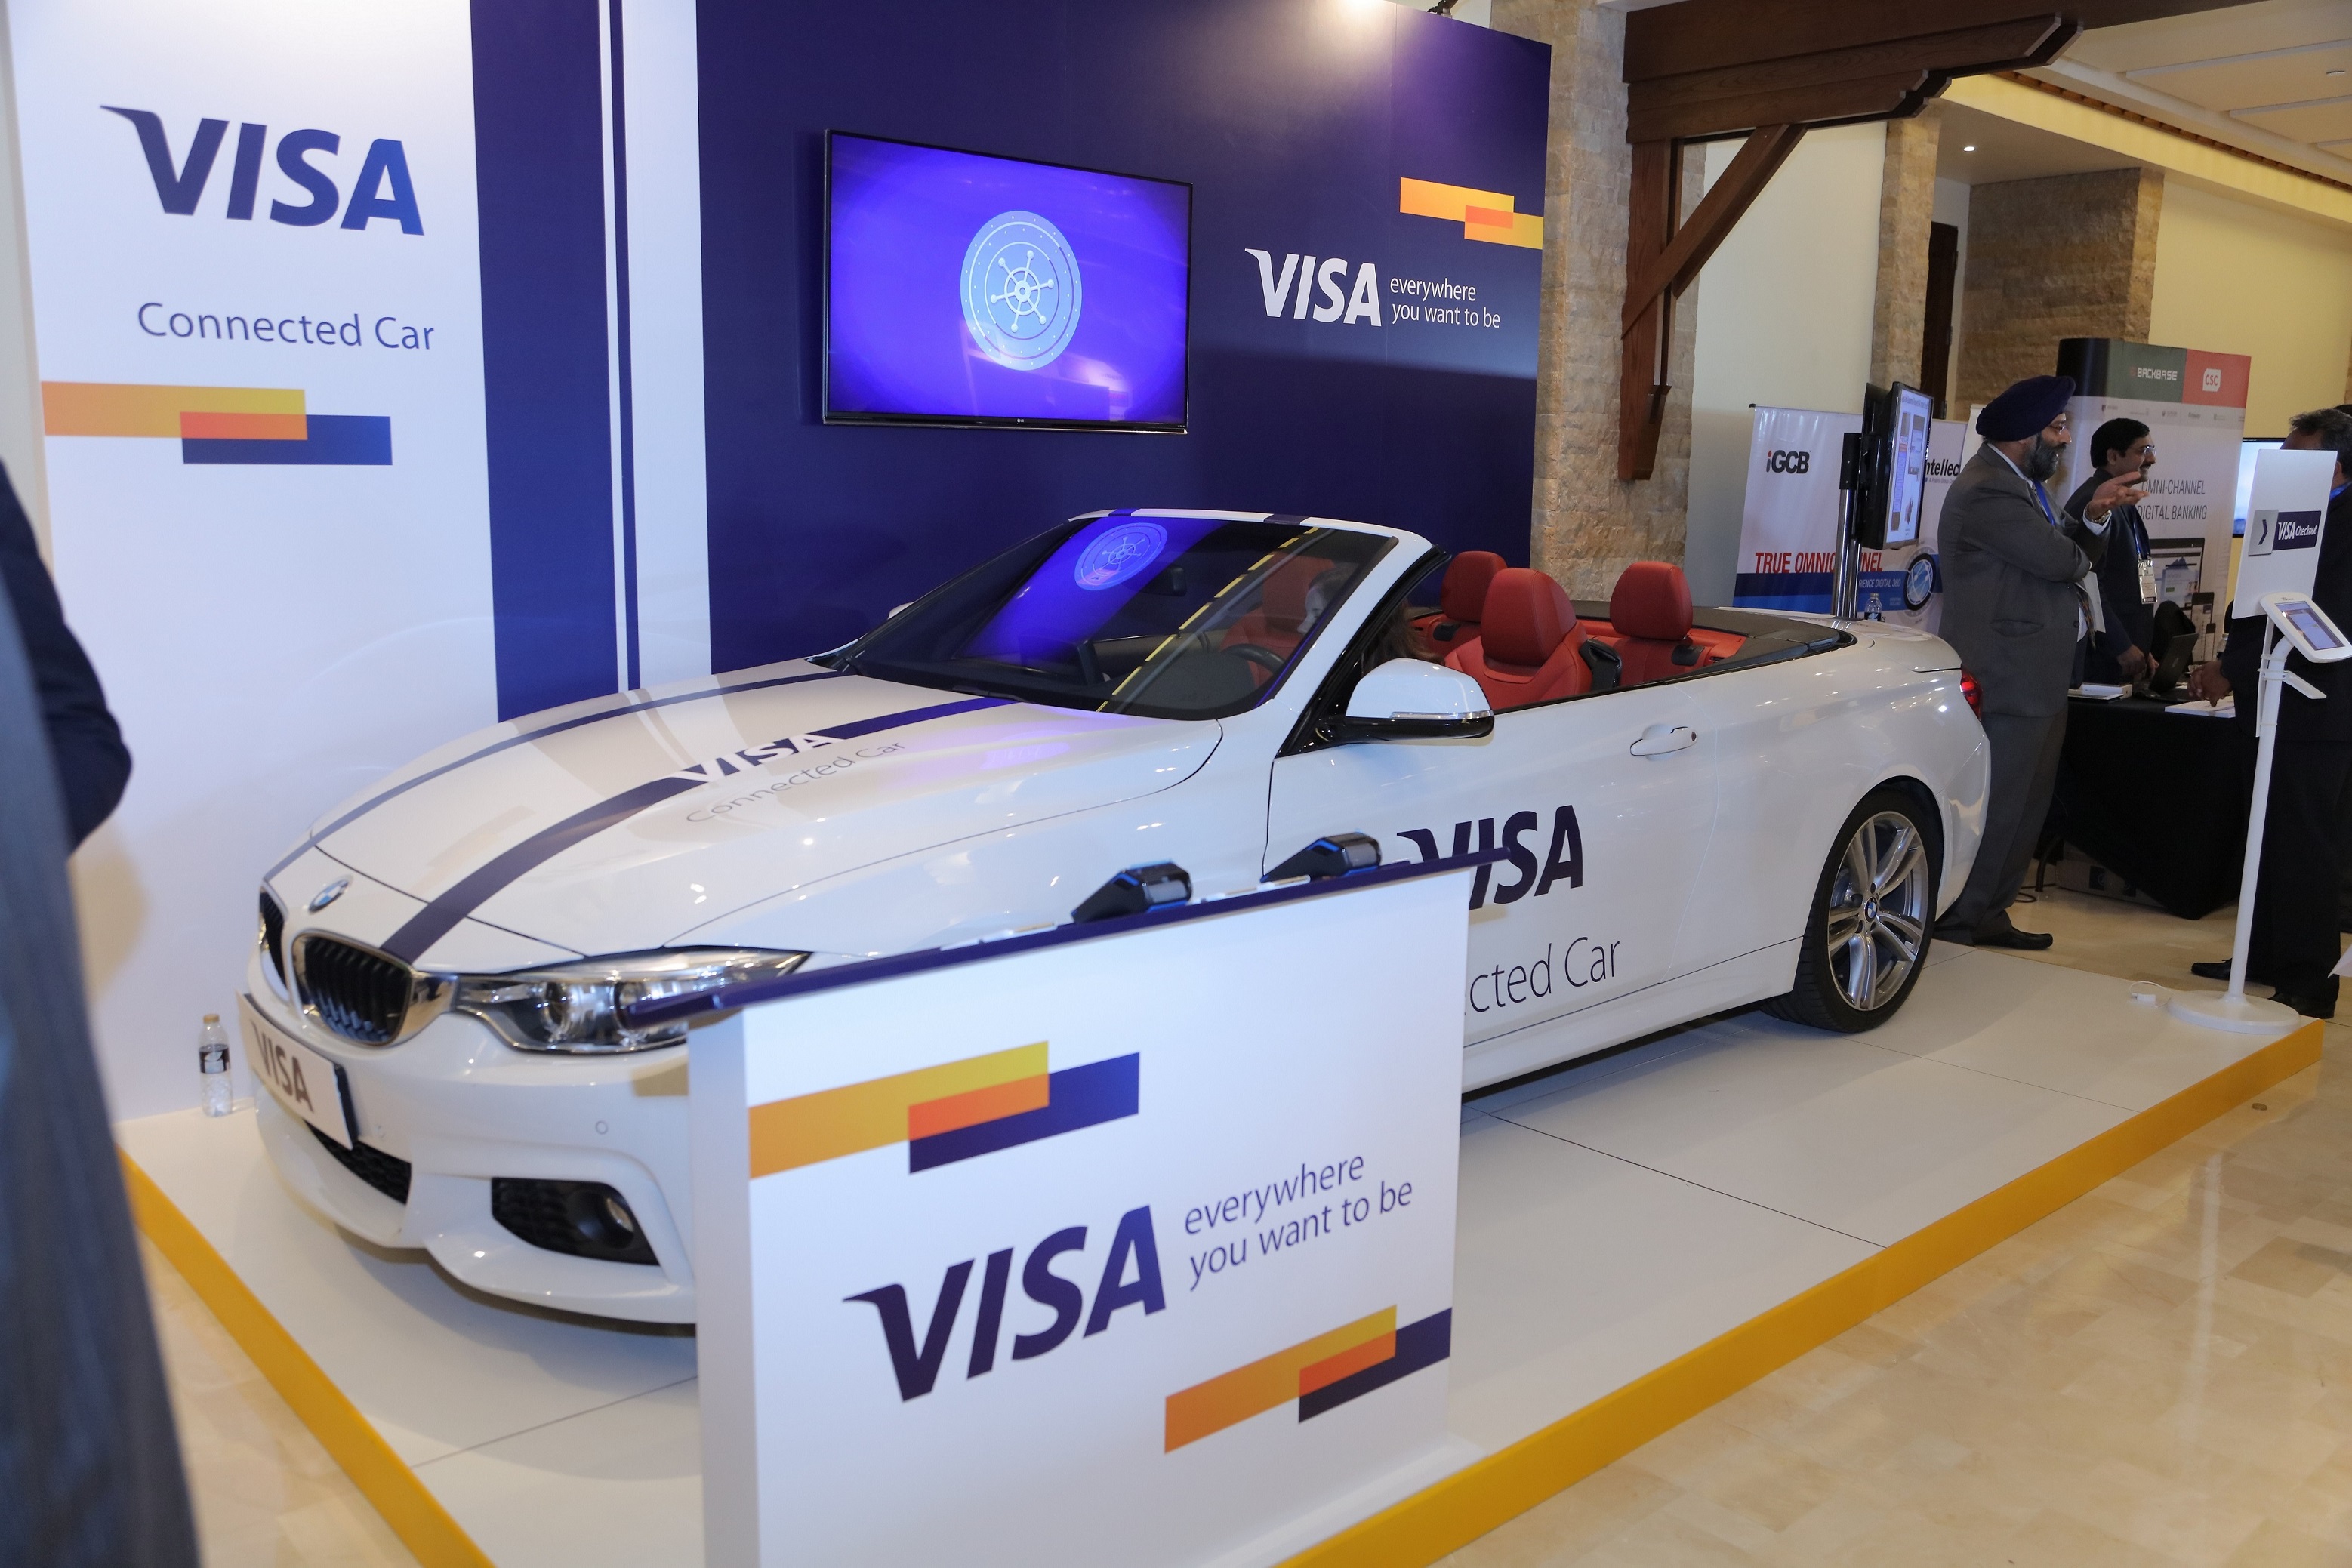 Visa showcases the future of the connected car commerce